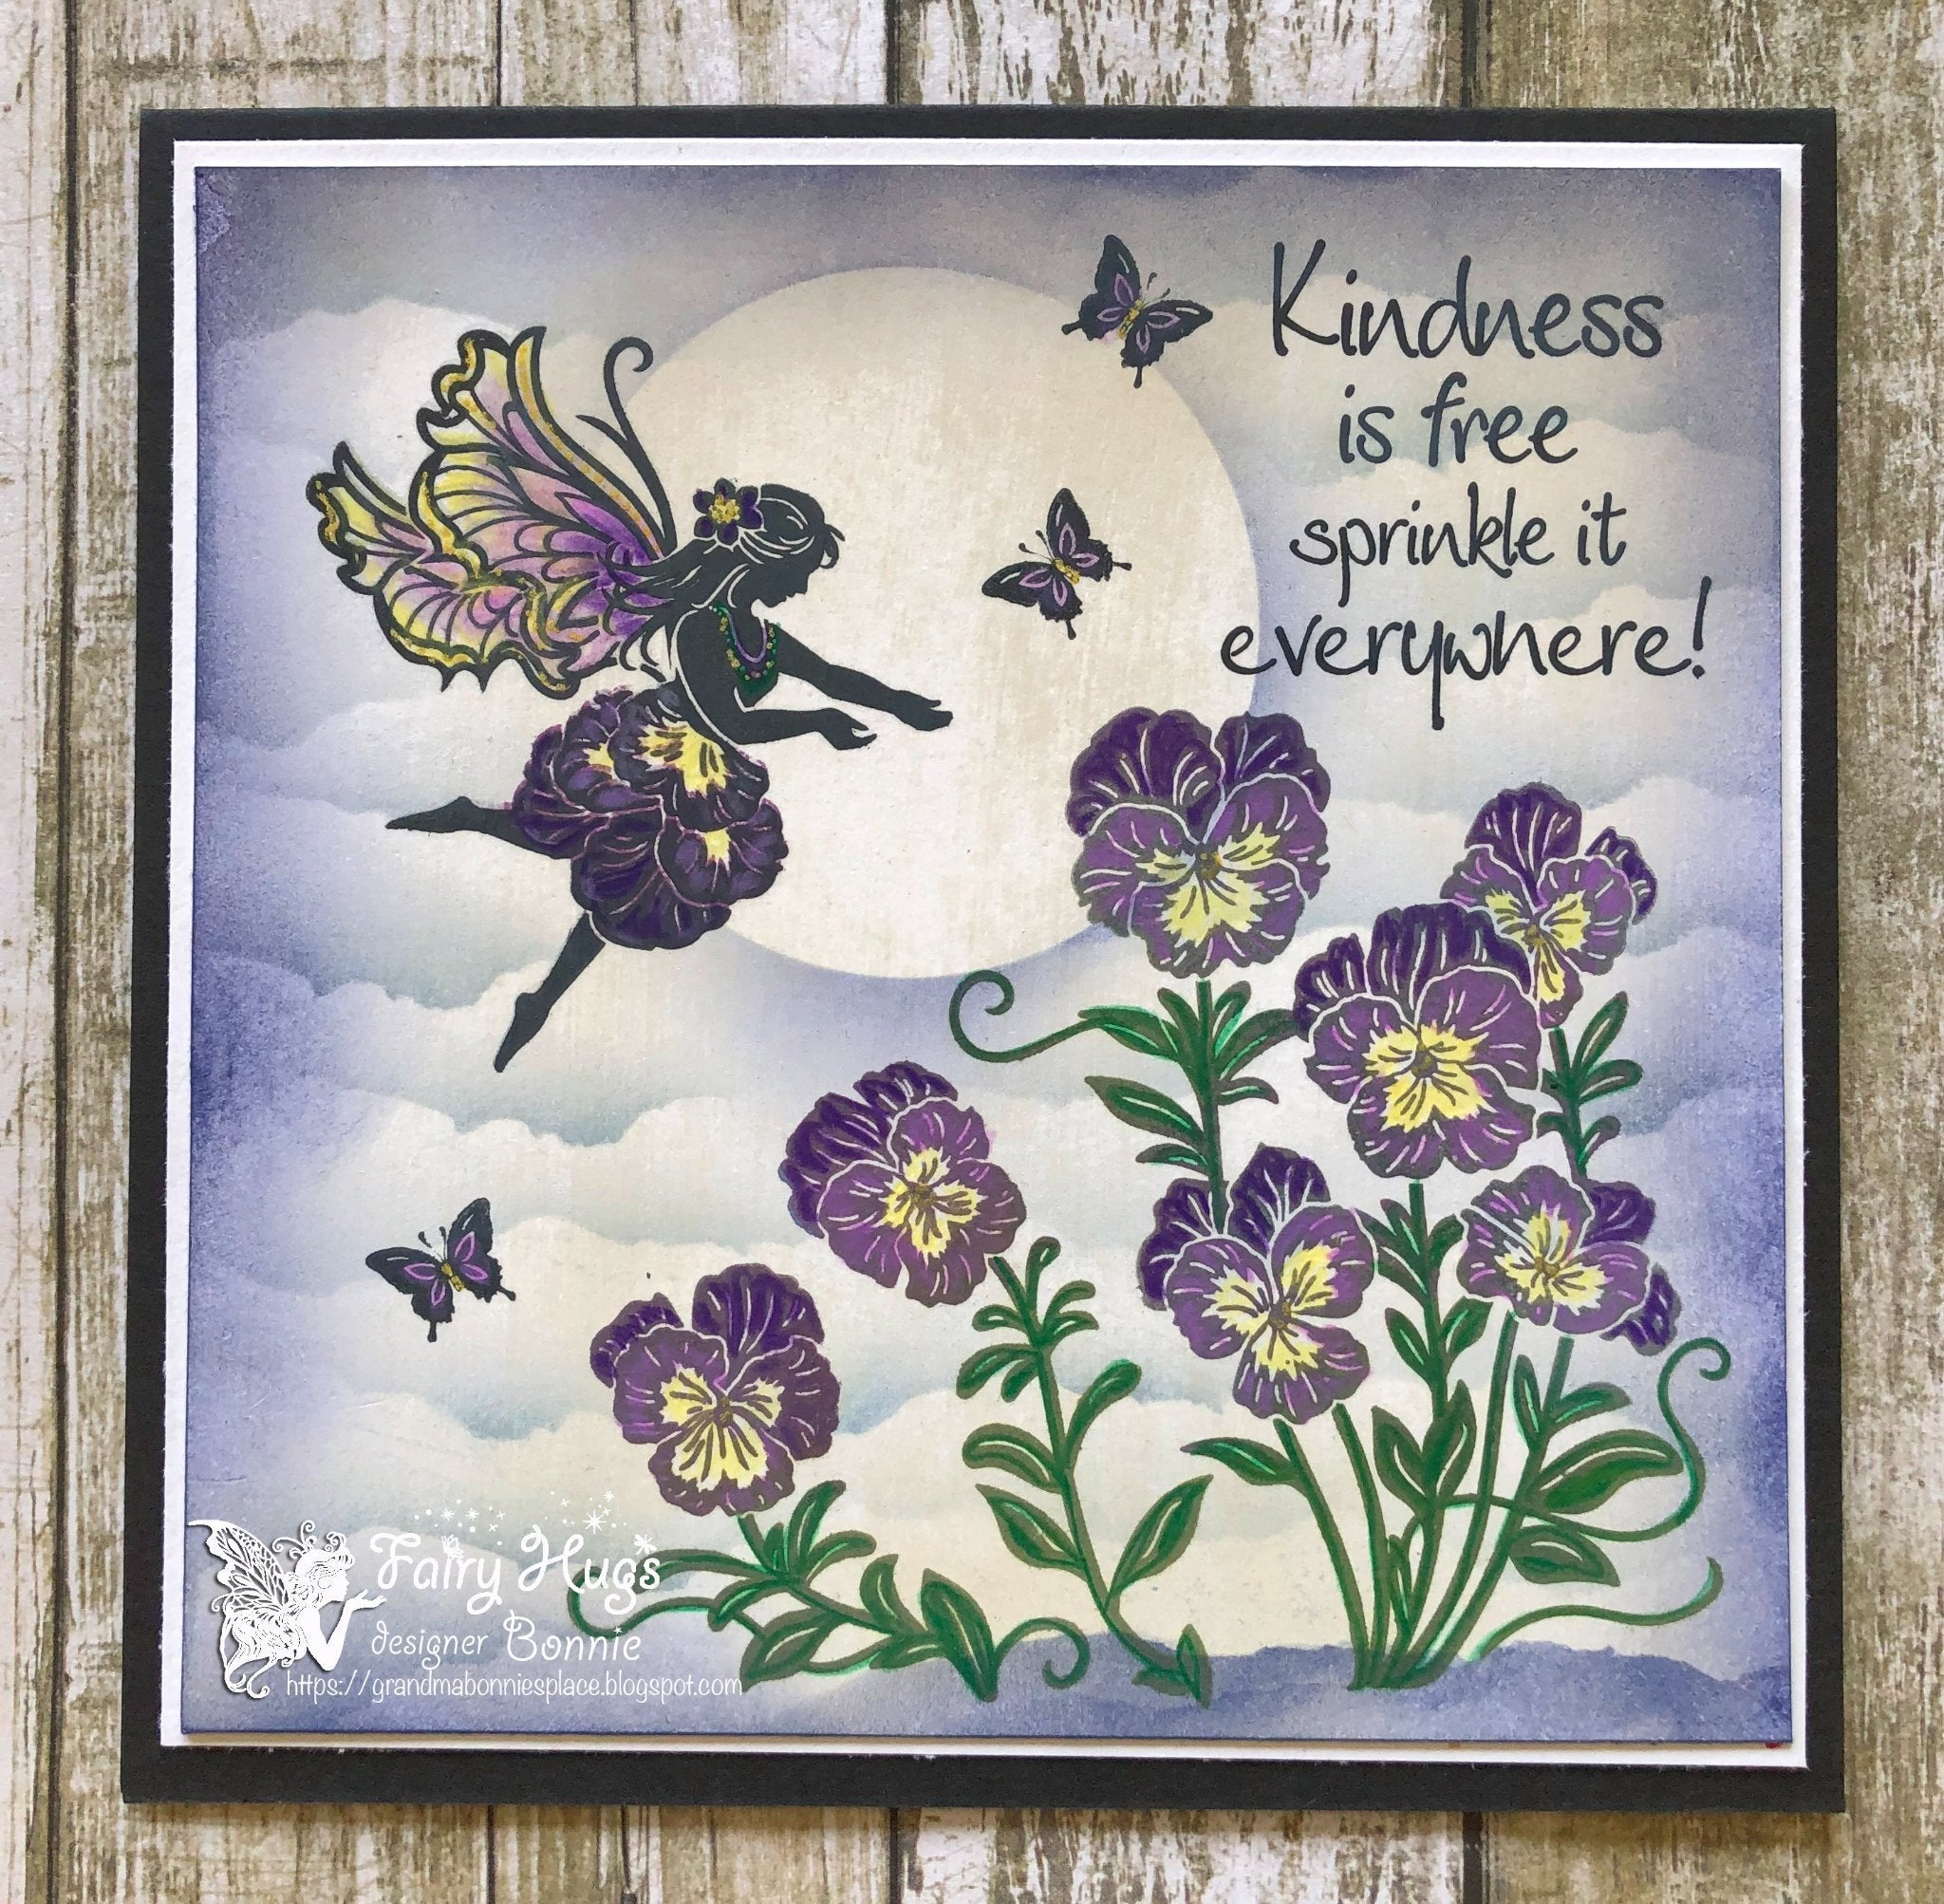 Fairy Hugs Stamps - Valerie's Pansy